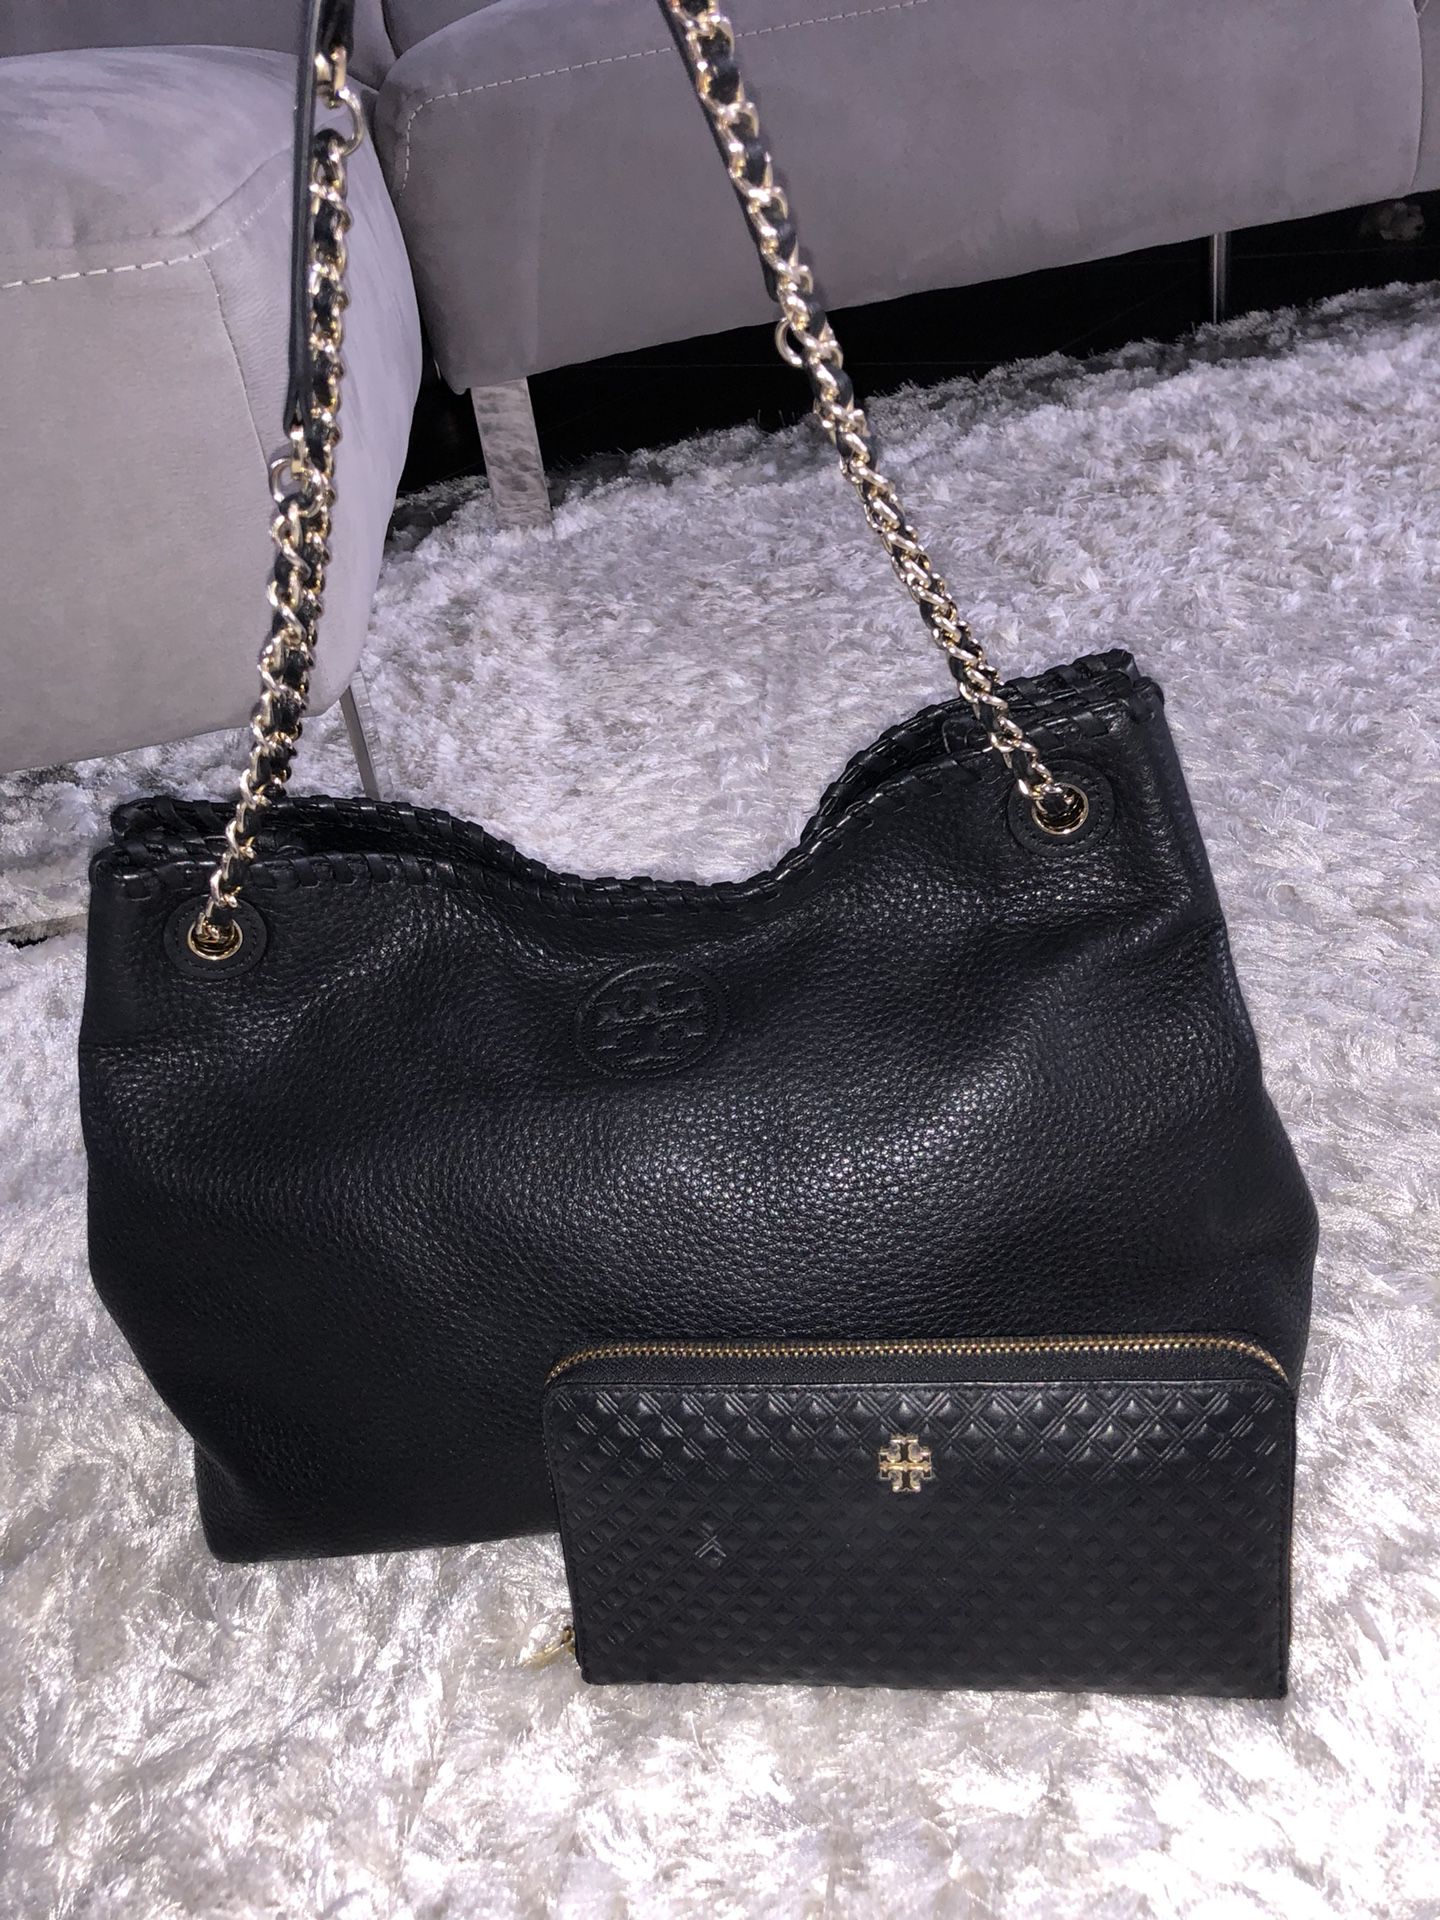 Tory Burch Black Leather Purse & Wallet